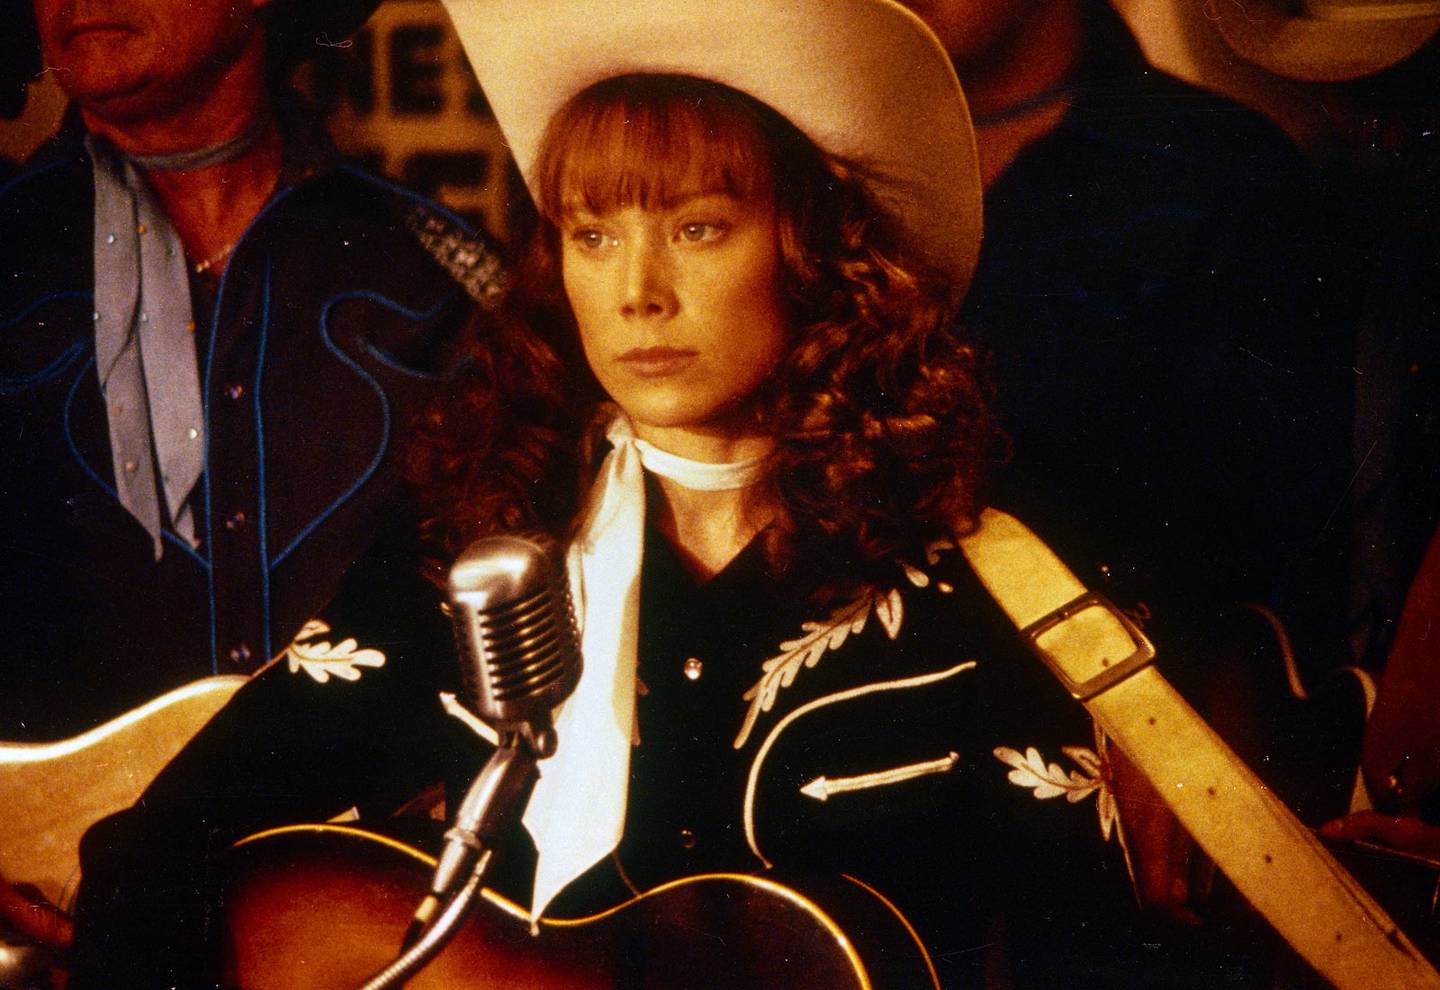 Sissy Spacek won a Best Actress Oscar for her portrayal of Lynn in the 1980 hit Coal Miner's Daughter. Photo: IMDb